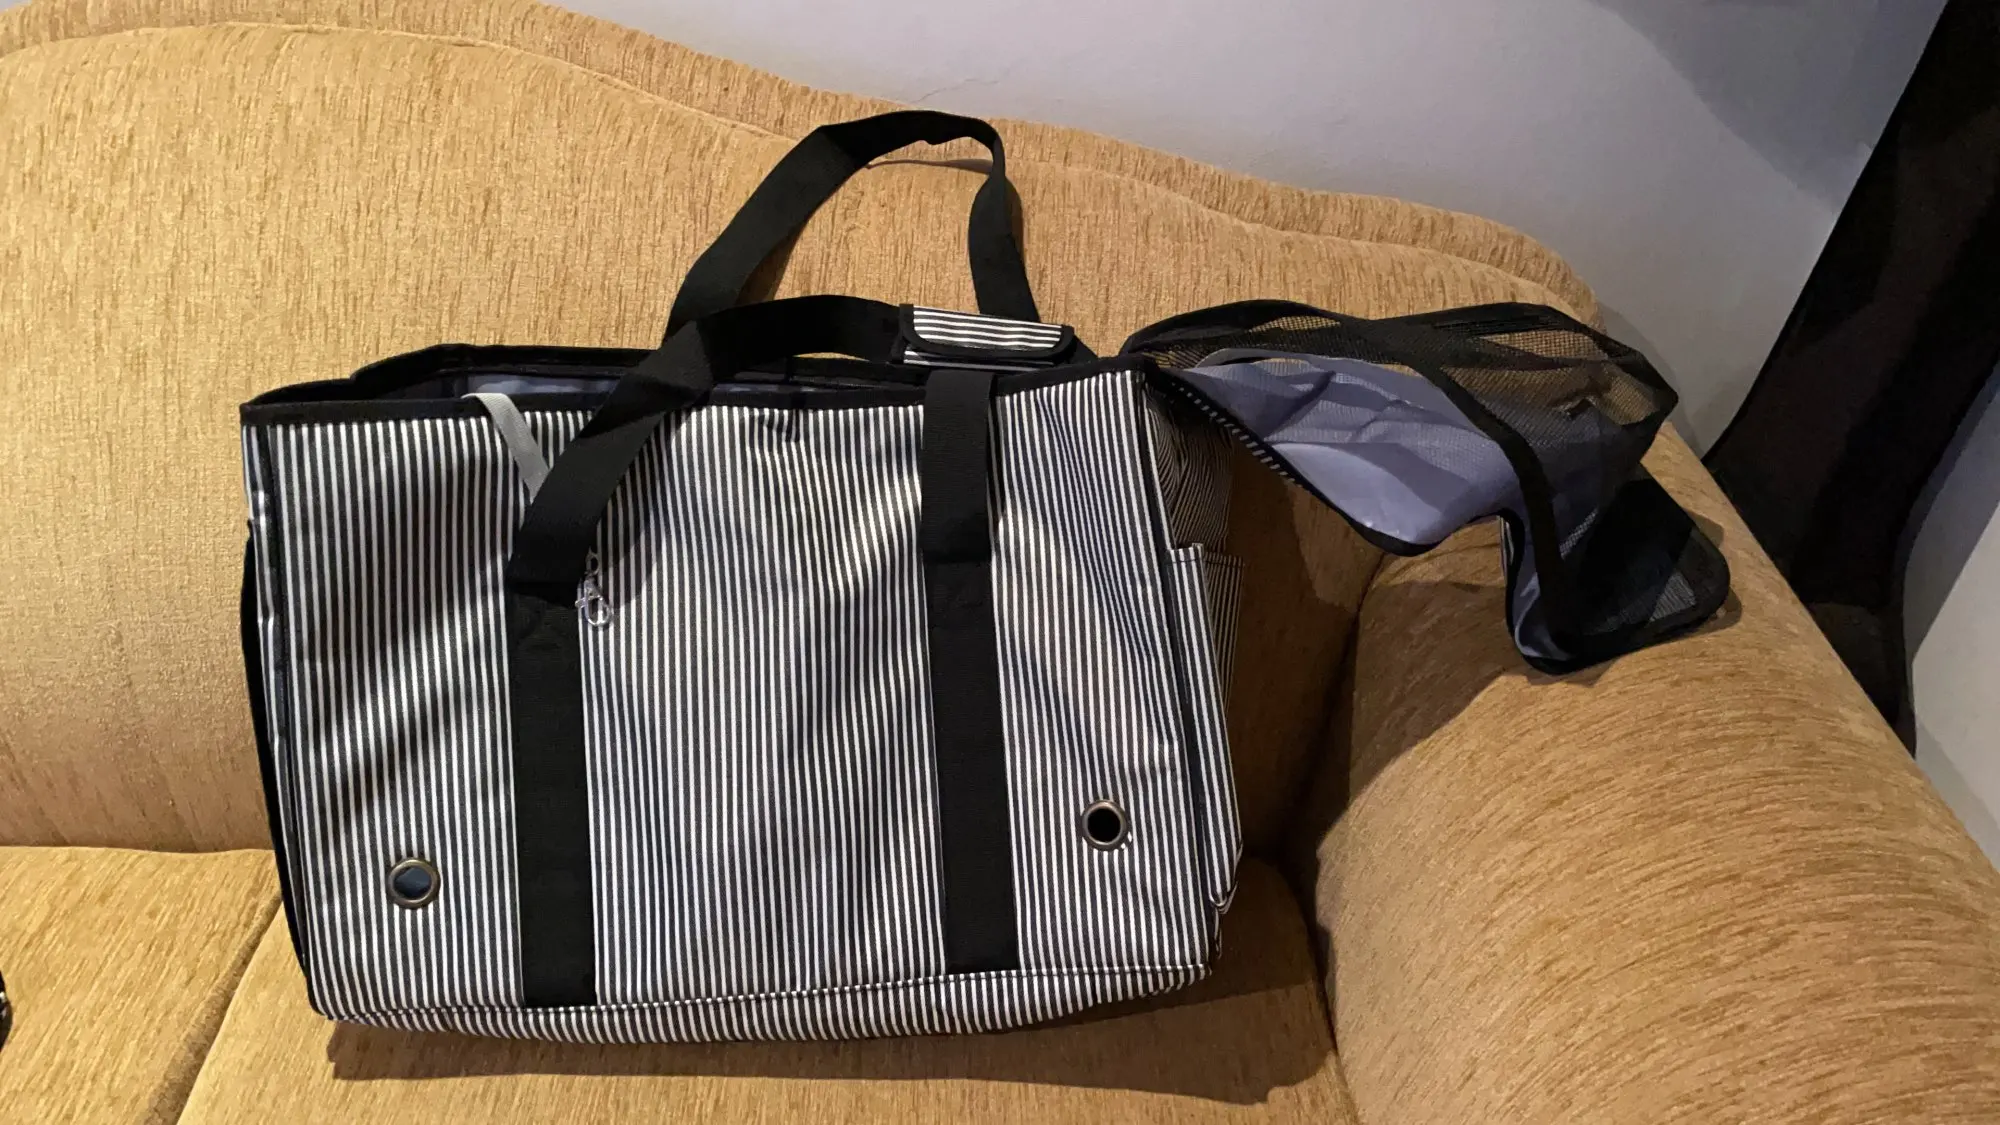 DogMEGA Striped Dog Carrier Tote photo review